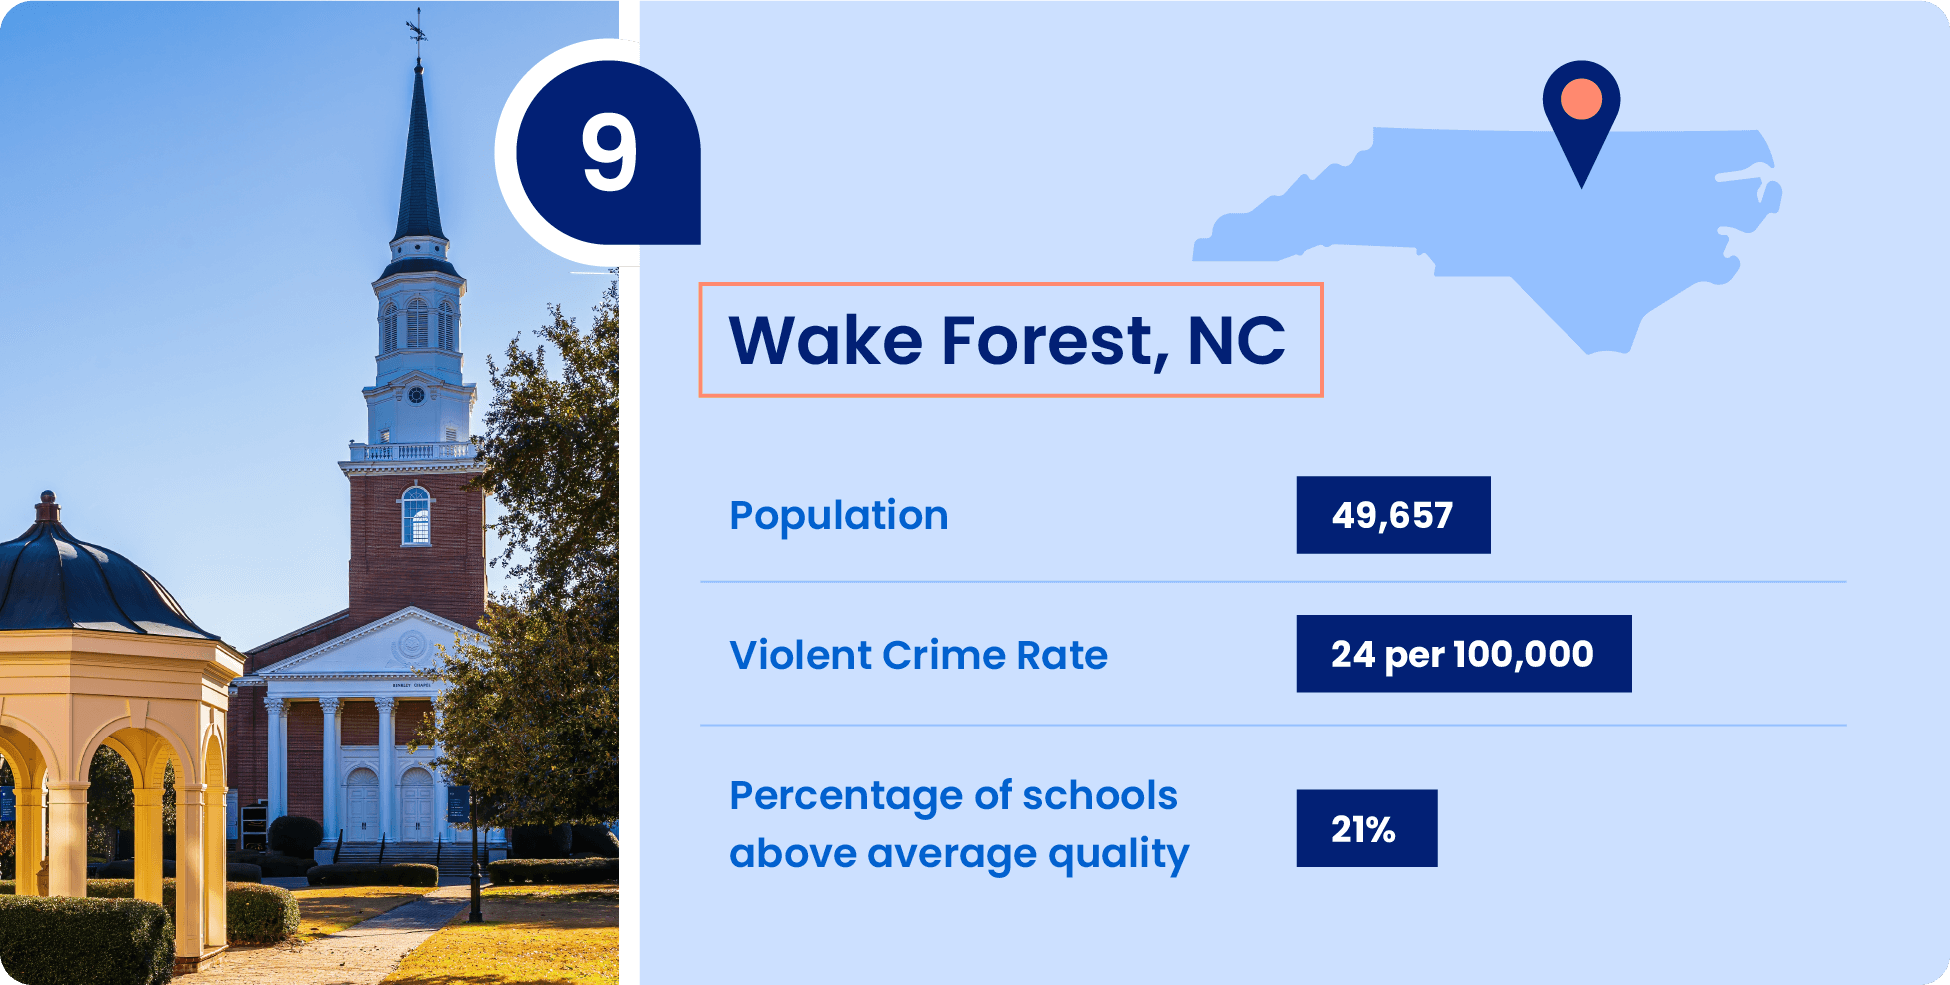 Image shows key information that make Wake Forest, North Carolina a great place to raise a family.